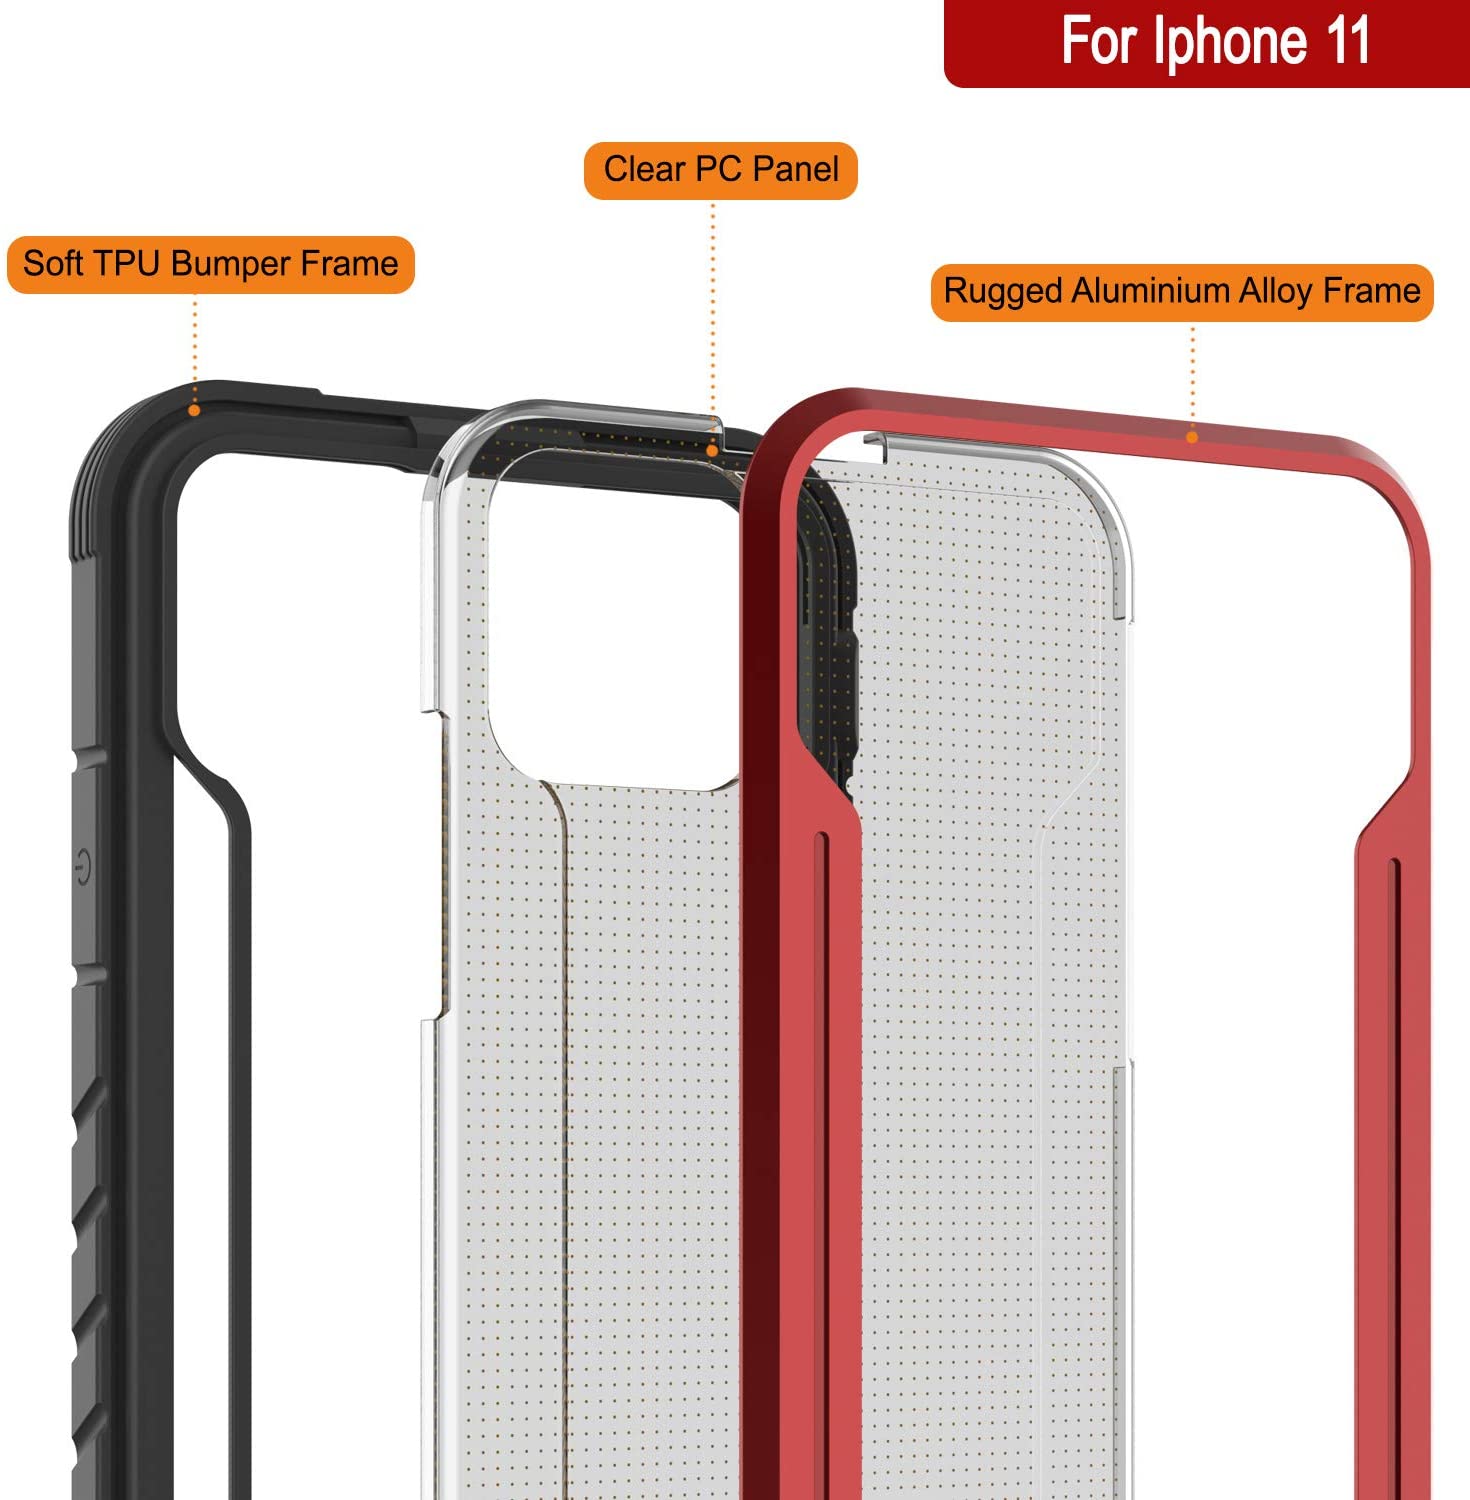 Punkcase iPhone 12 Mini ravenger Case Protective Military Grade Multilayer Cover [Red]